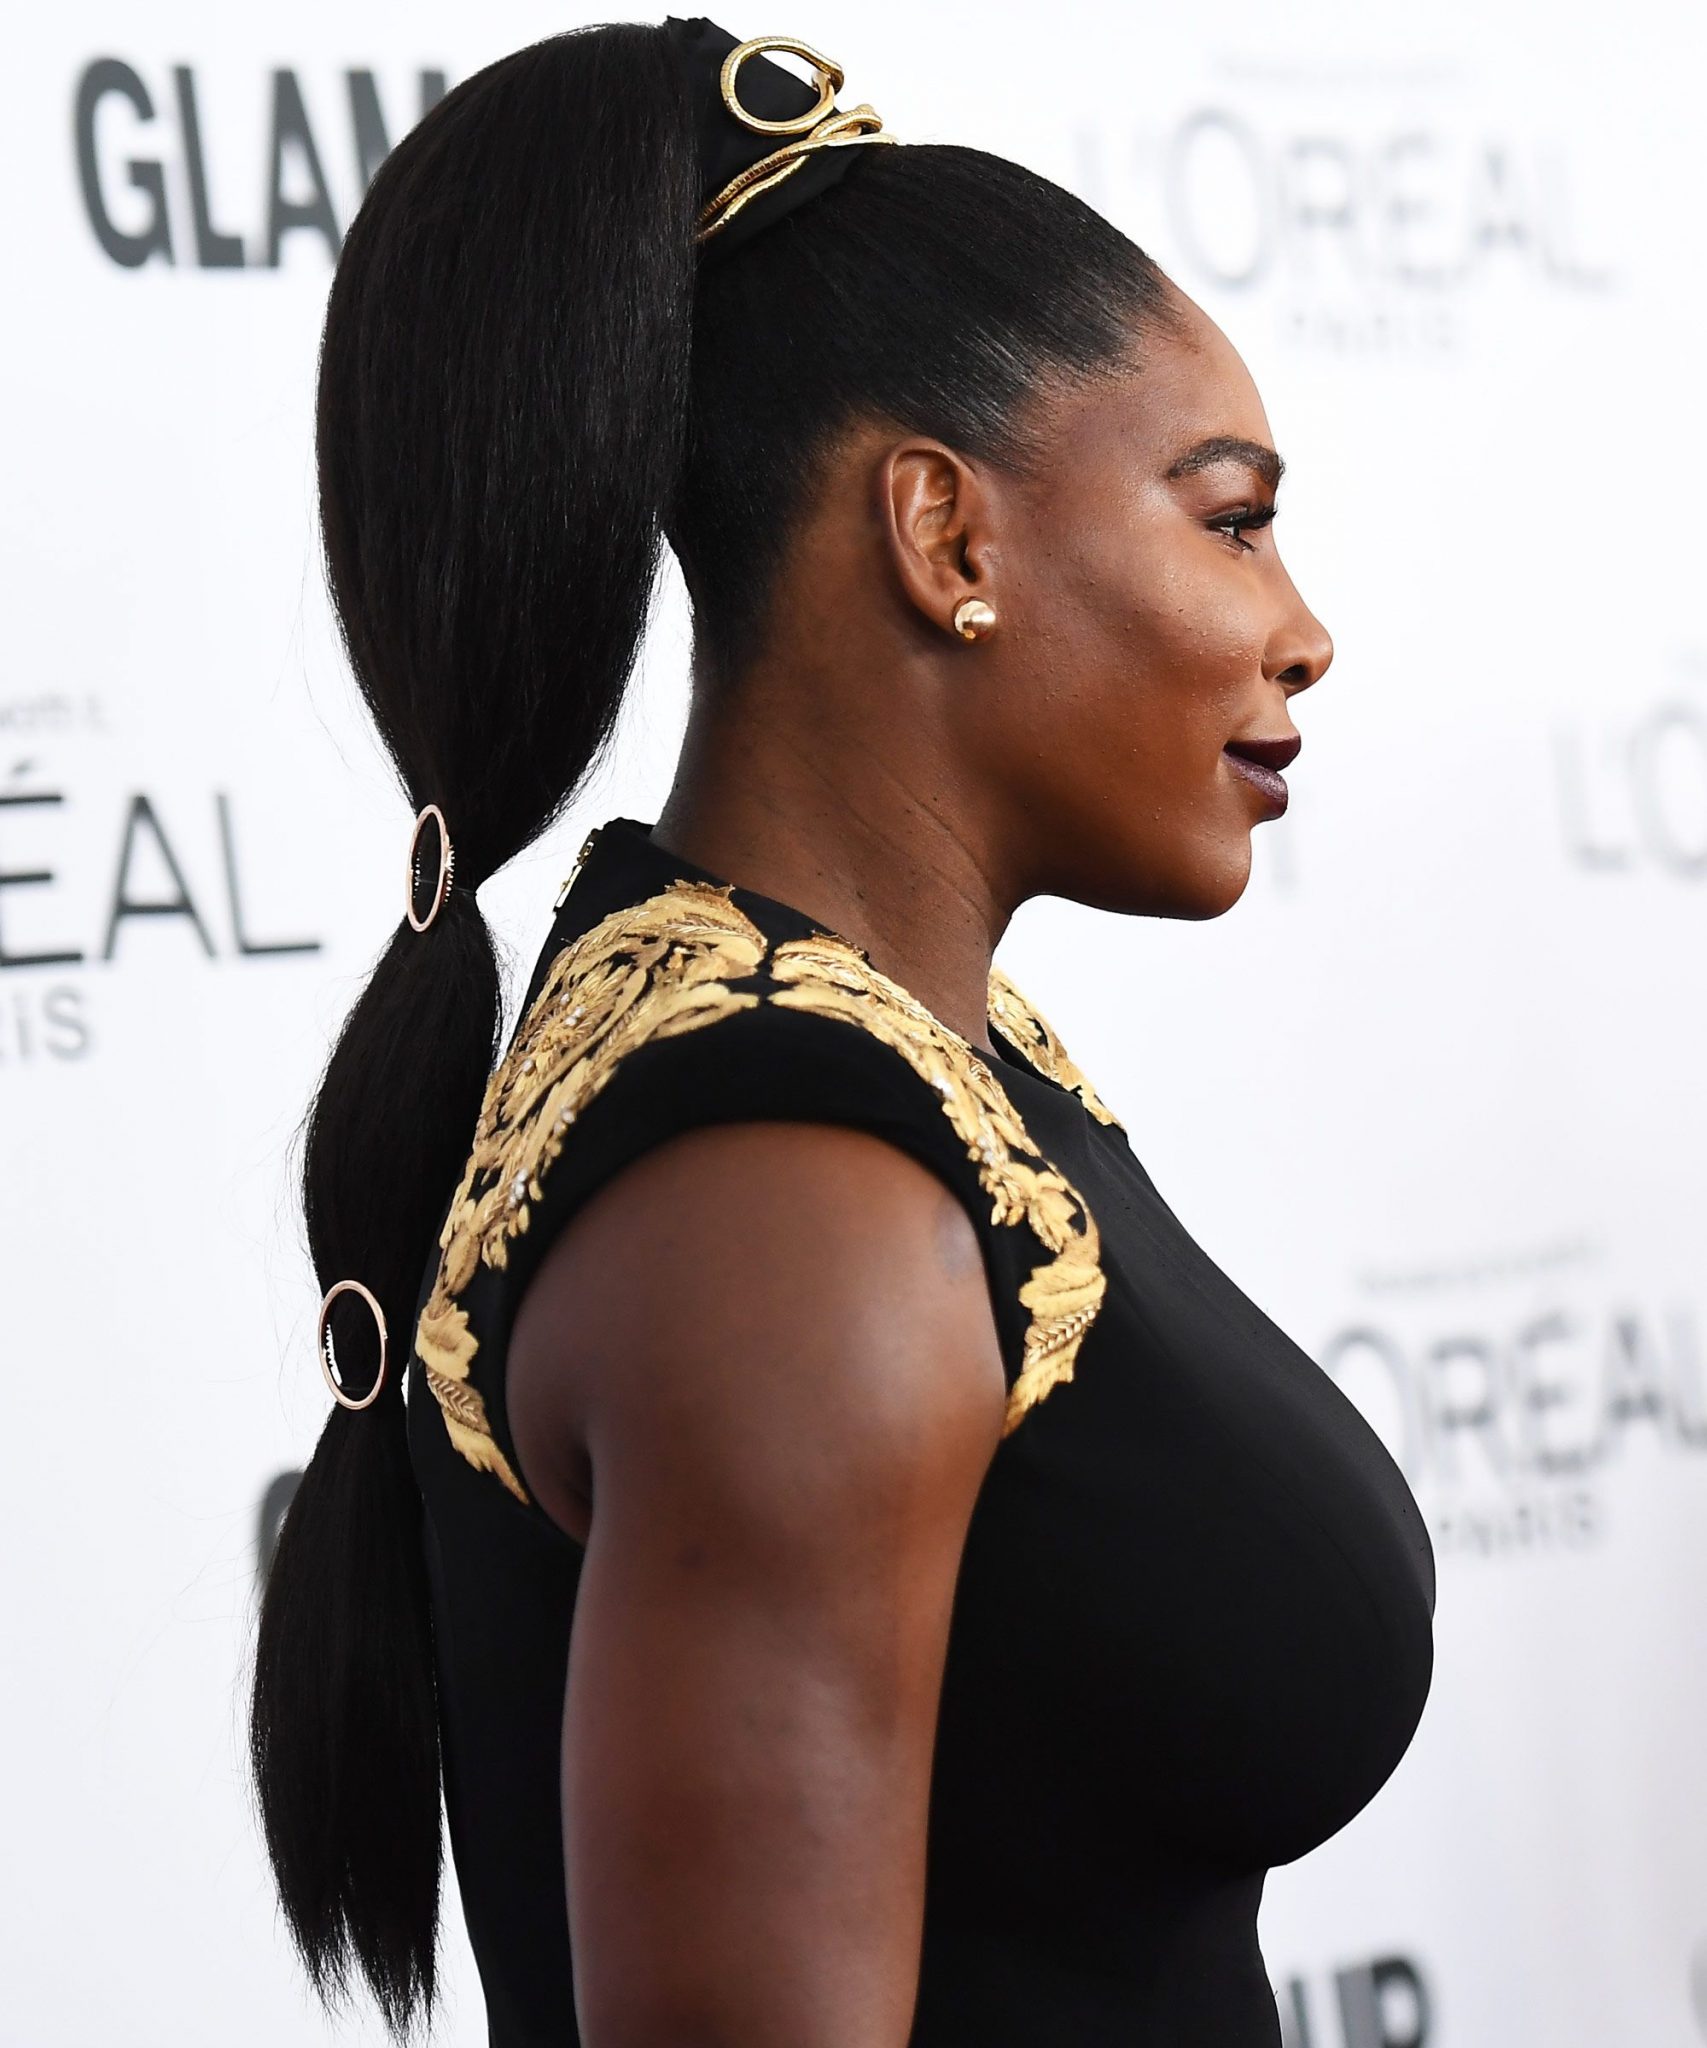 long ponytails are the beauty trend celebrities just can’t quit